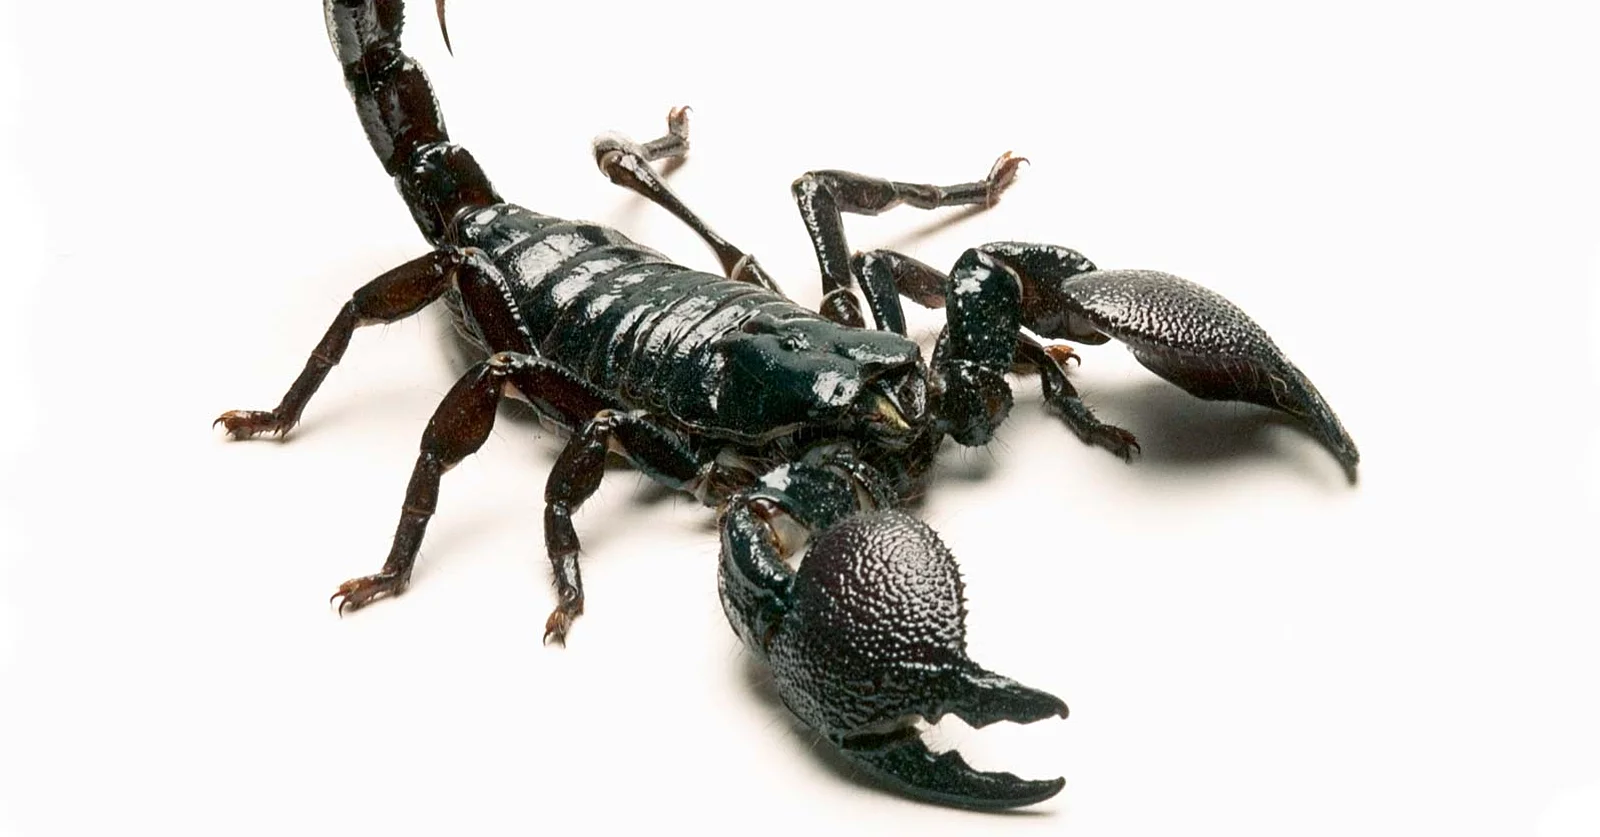 Some believe booking a ticket on a low-cost airline can have a sting in its tail and that was certainly the case for one man who flew on GOL Linhas Aereas in Brazil, only to be stung by a scorpion mid-flight.